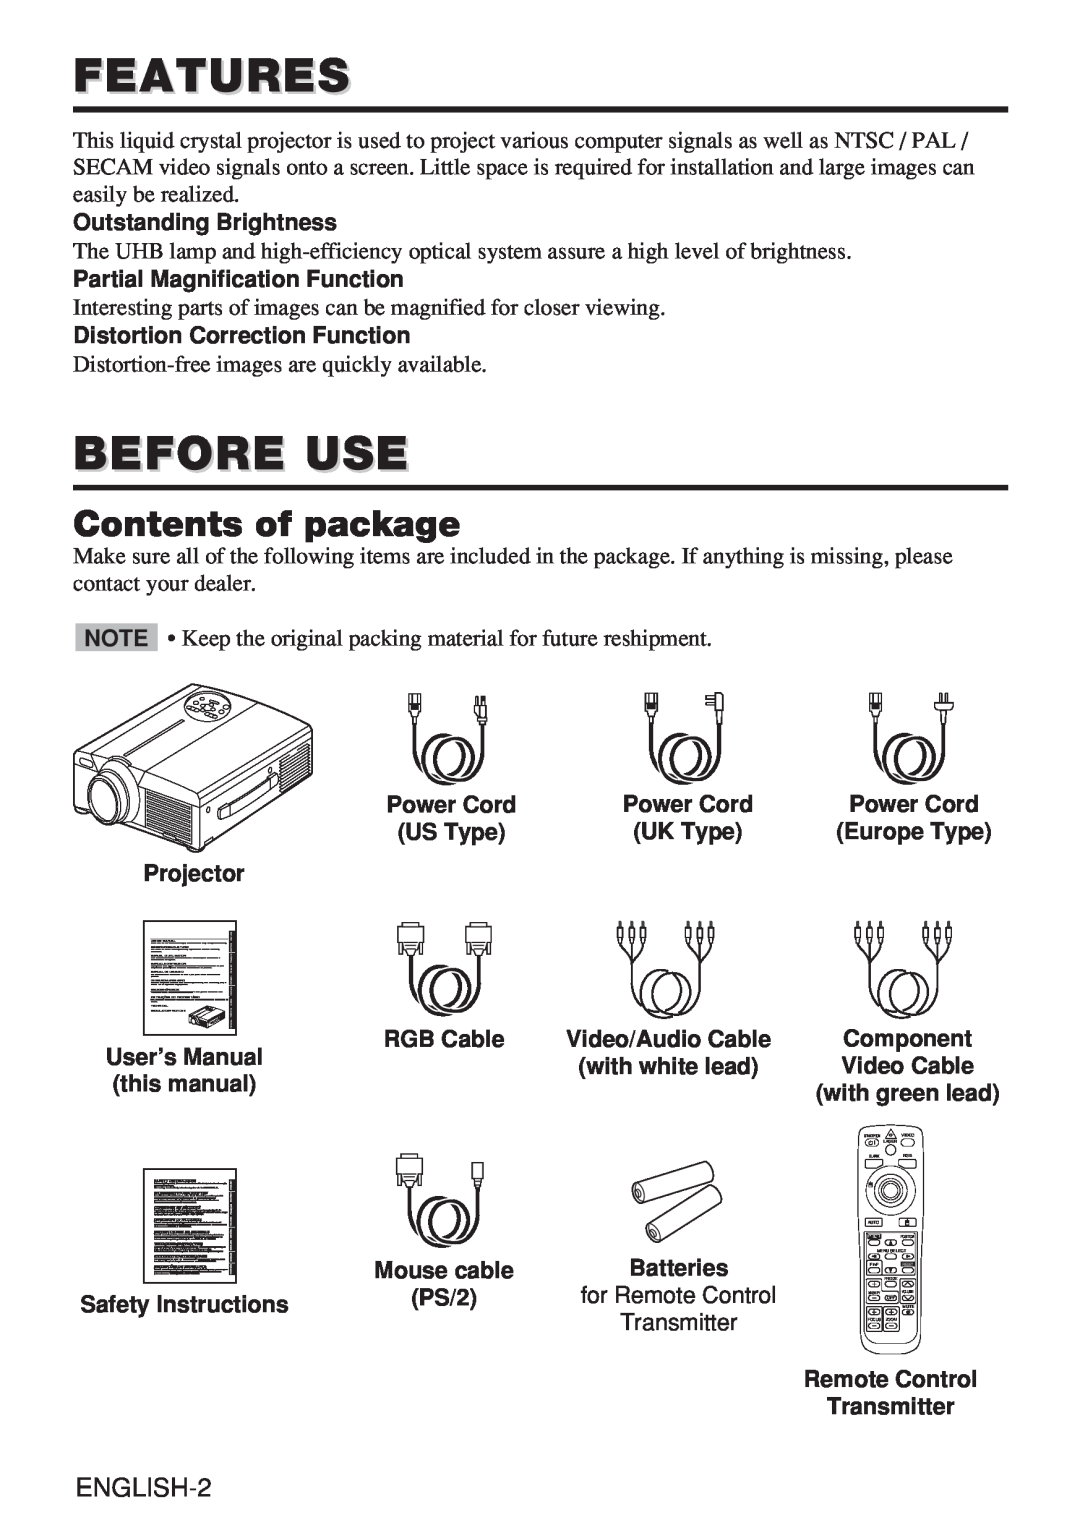 Hitachi CP-X980W user manual Features, Before Use, Contents of package 